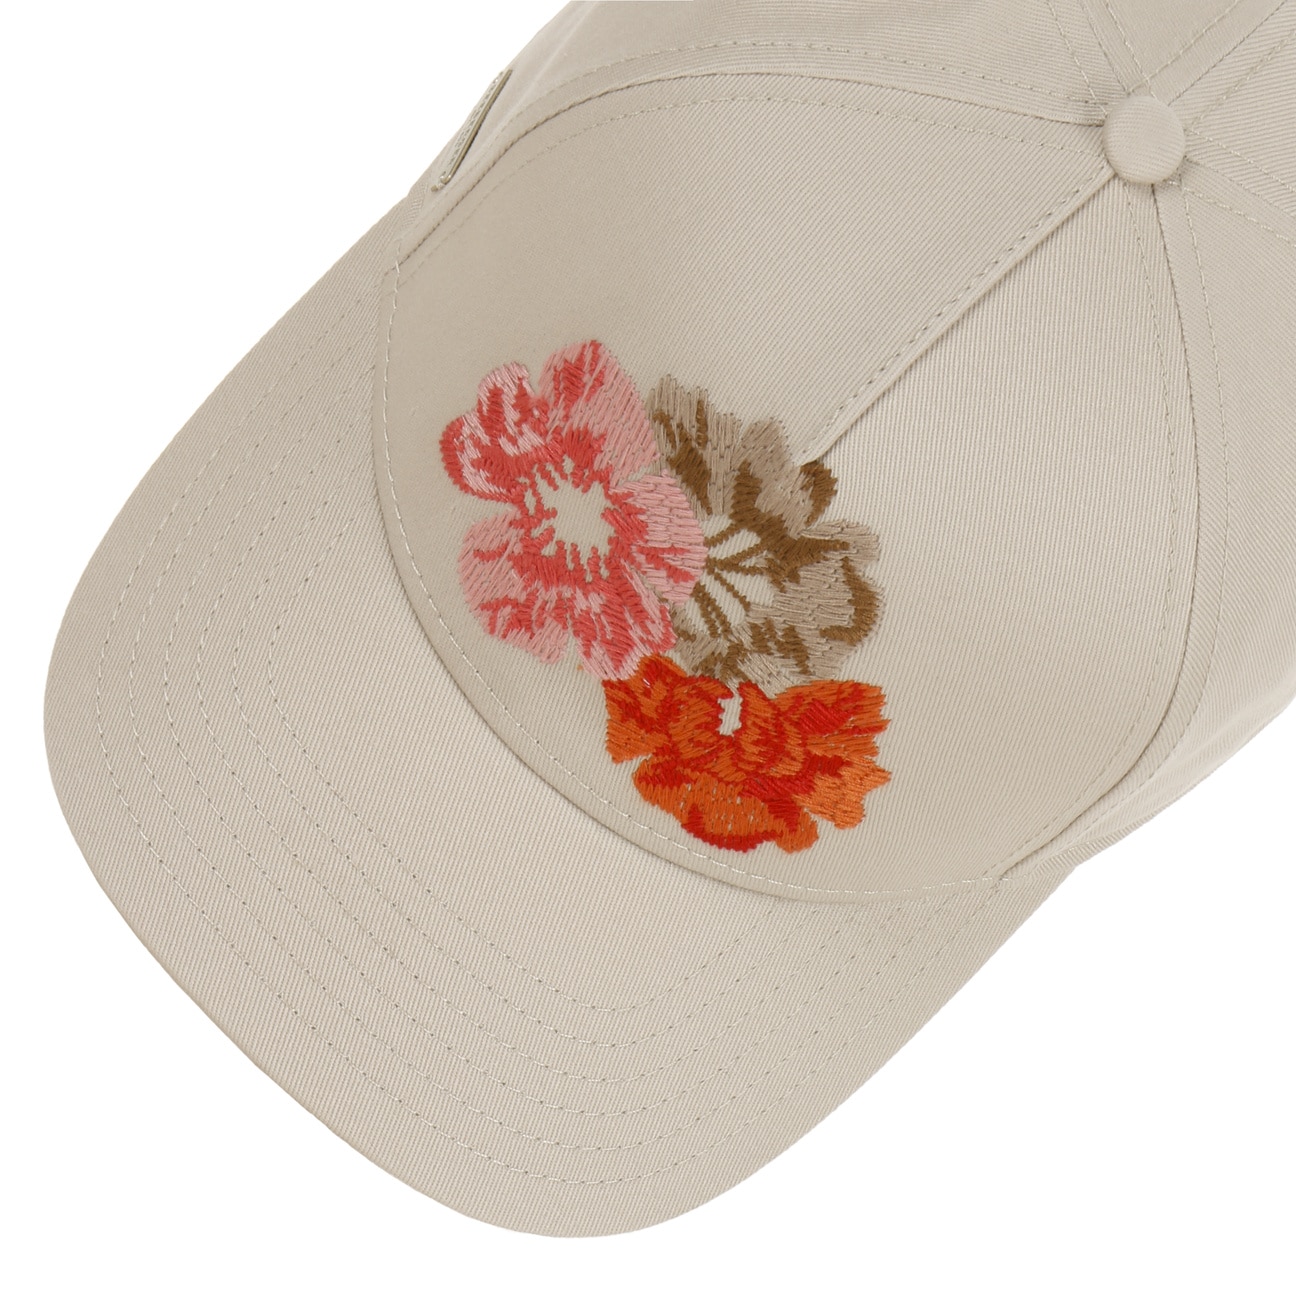 Stitched Flowers by Seeberger Cap 29,95 - €